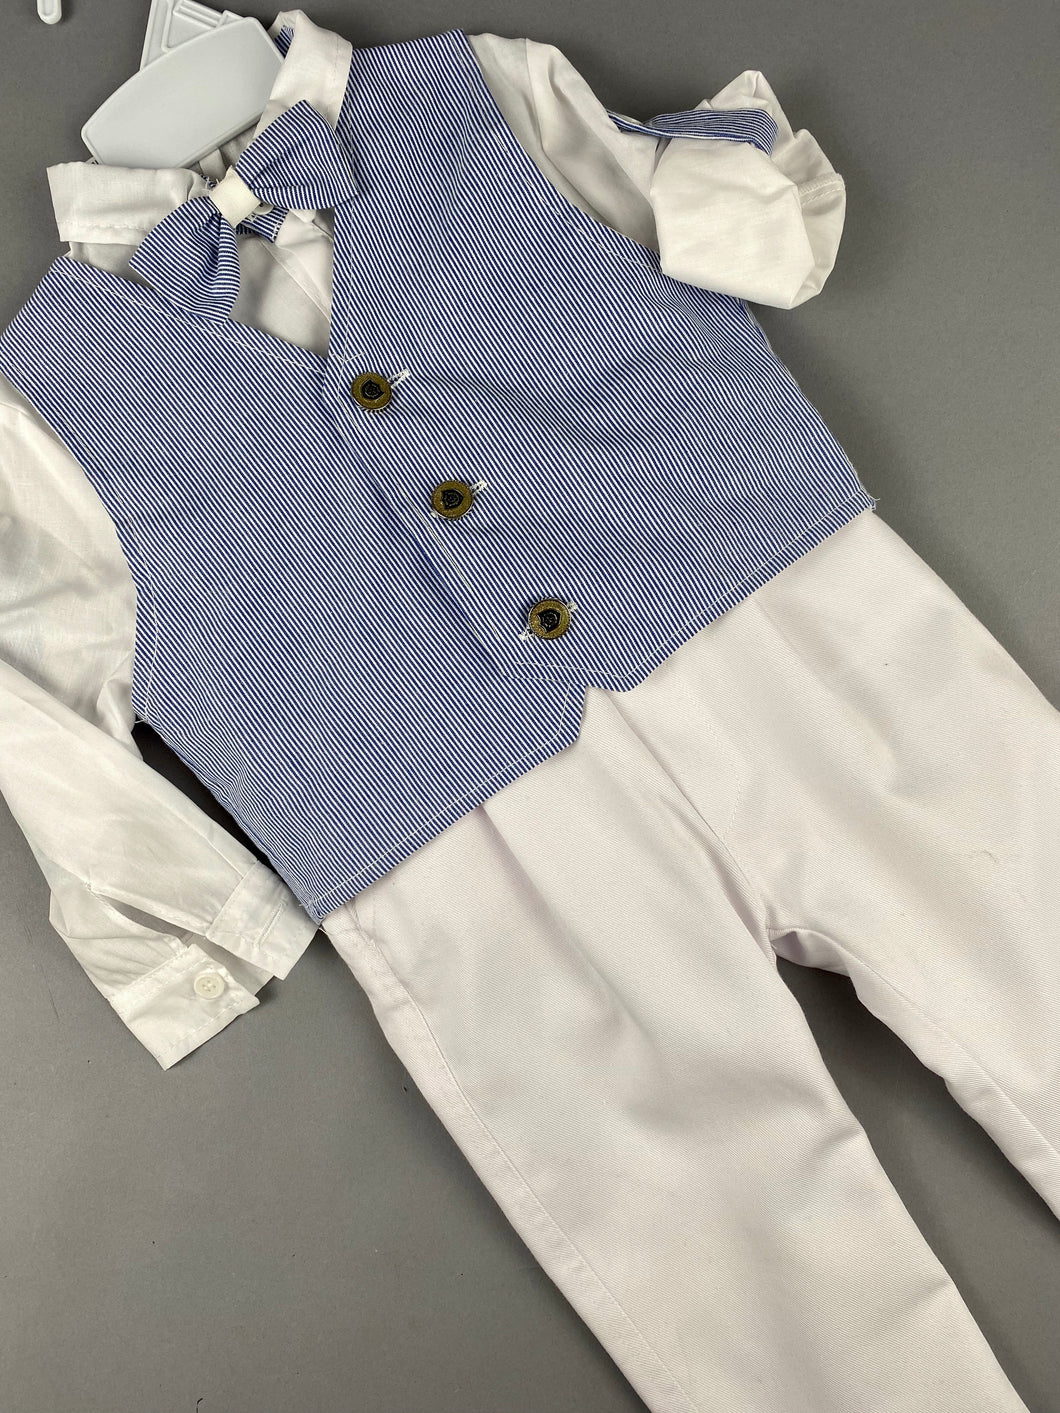 Rosies Collections 7pc full suit, Dress shirt Trimmed with Blue Stripe,Cuff sleeves, White Pants, Blue Pinstripe Jacket, Vest, Belt or Suspenders, Cap. Made in Greece exclusively for Rosies Collections S201910